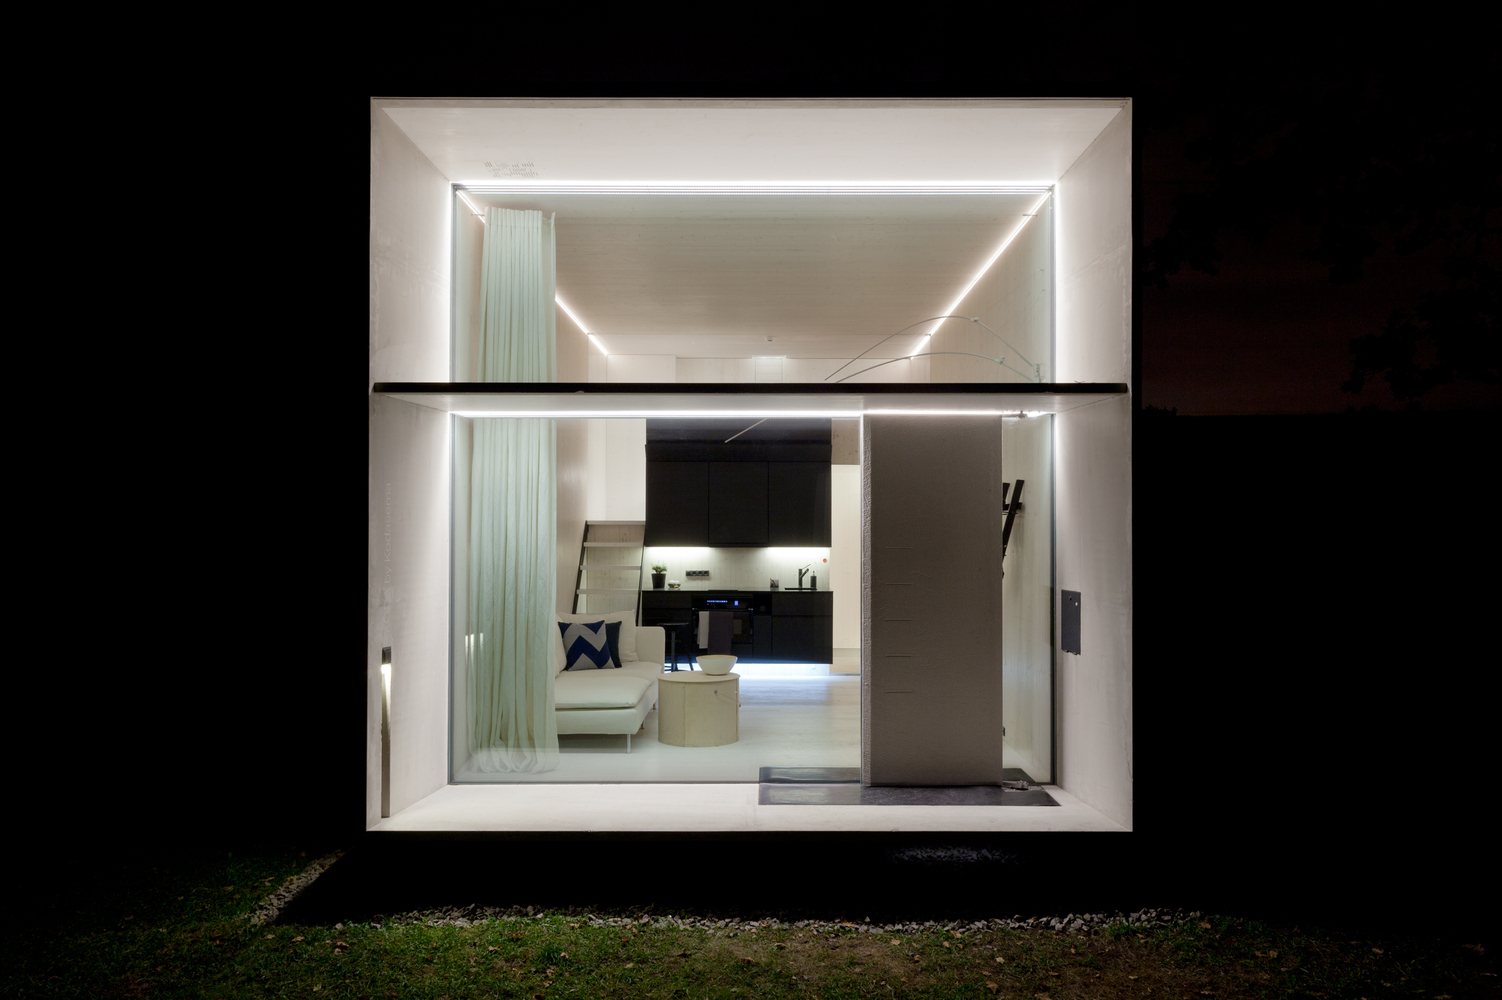 A night-time picture of a tiny home with front glass lit up to show the modern interior.